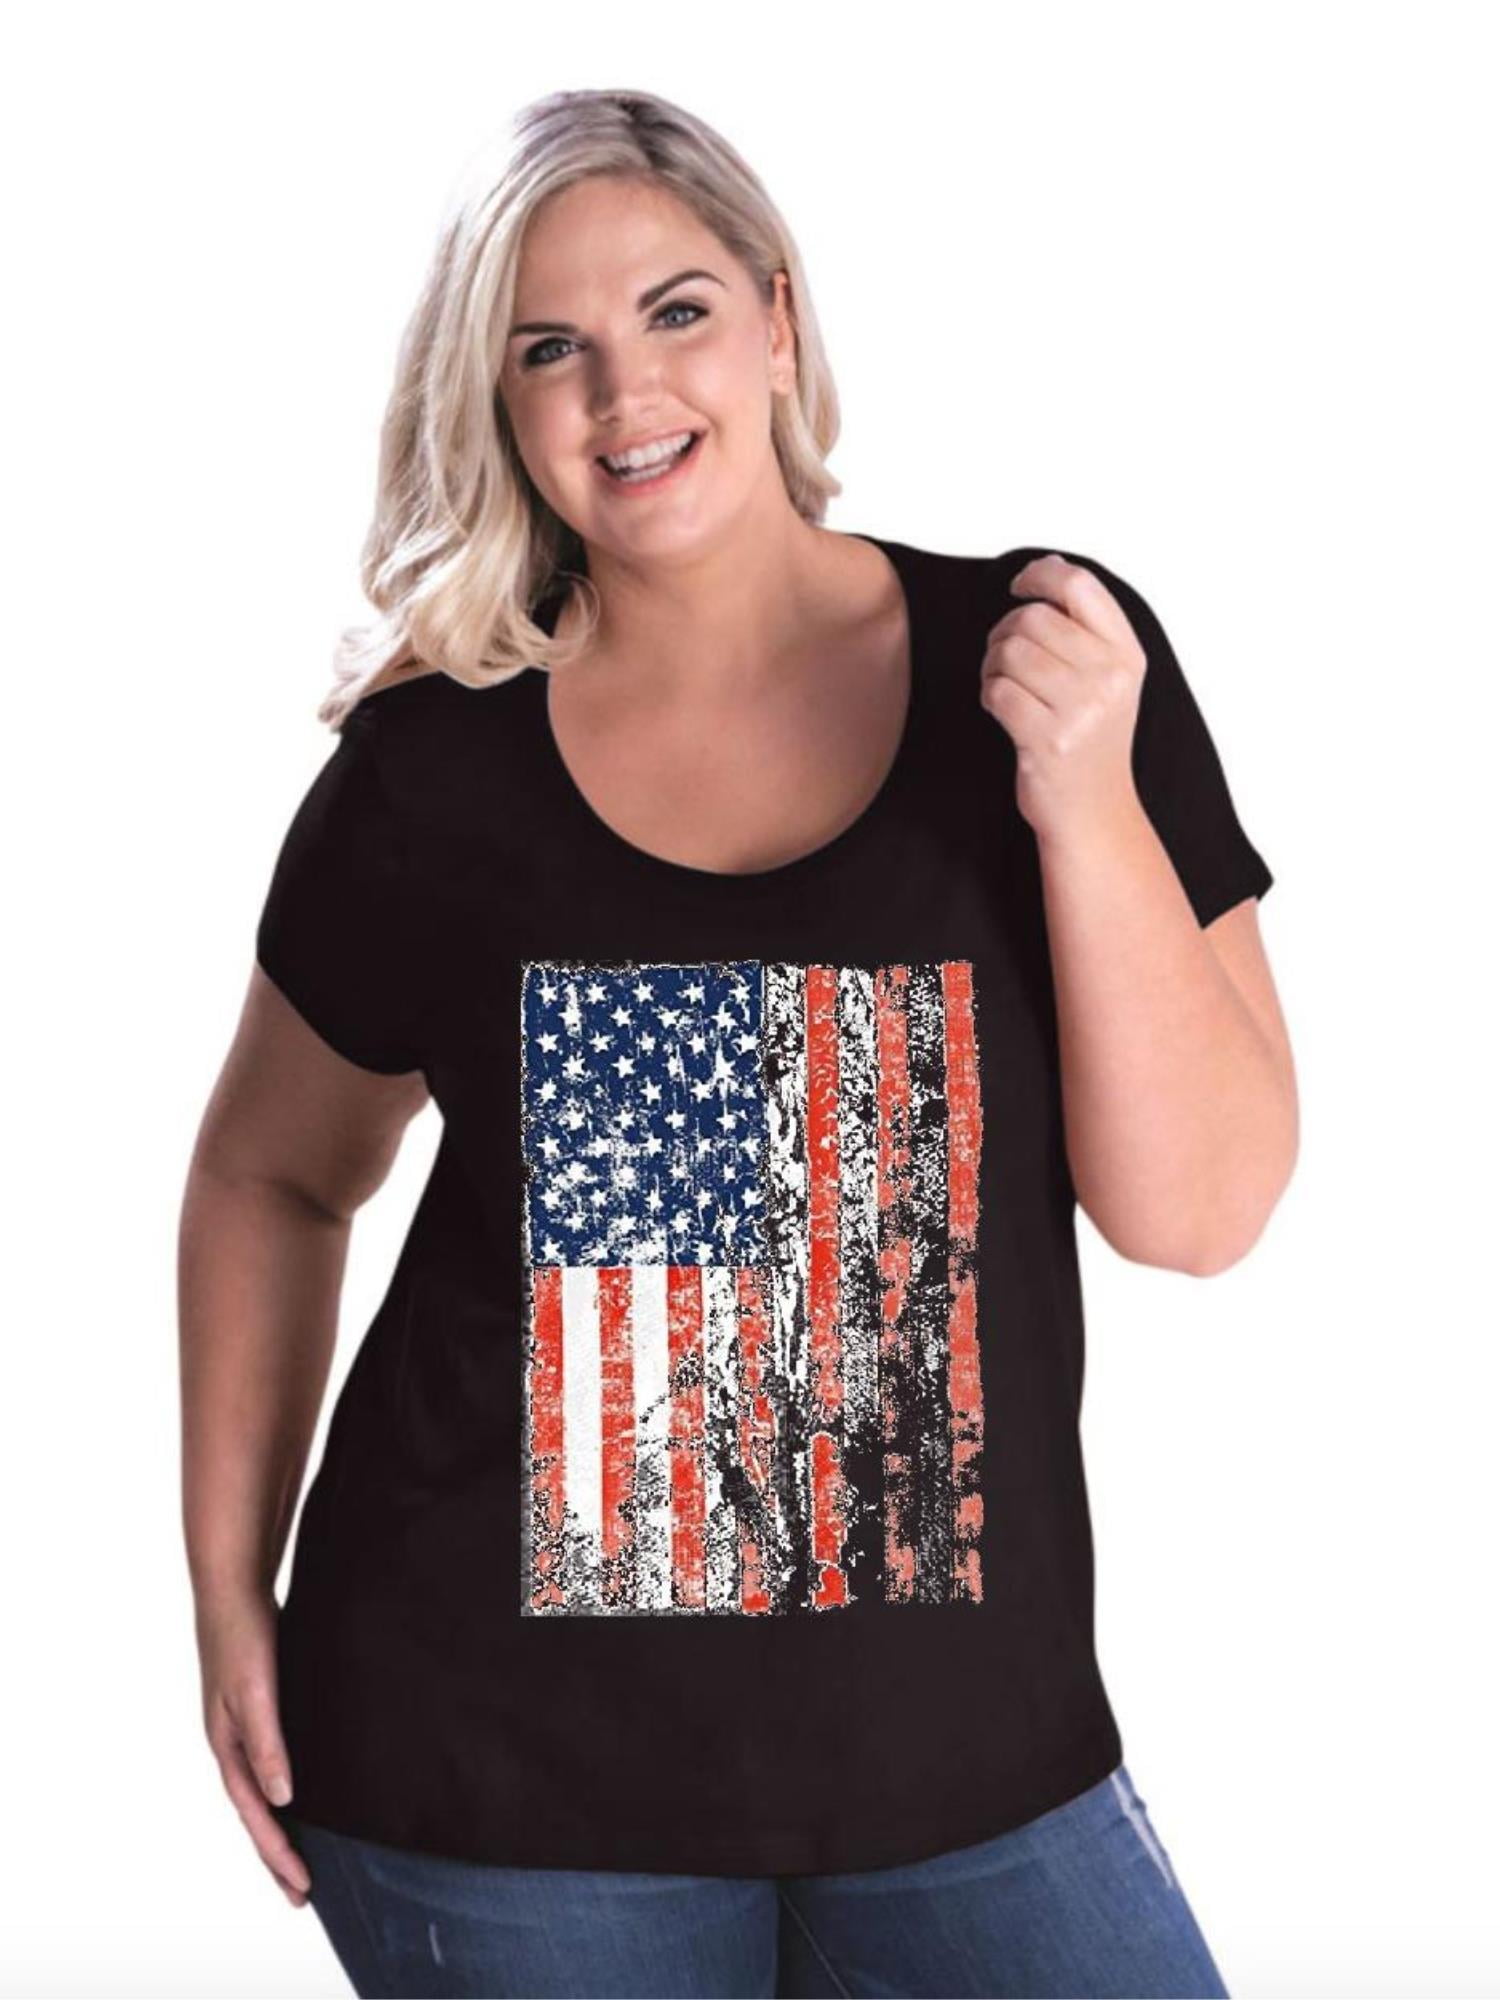 ANOKA Women Plus Size USA American Flag Independence Day Tshirt Blouse Tank Tops